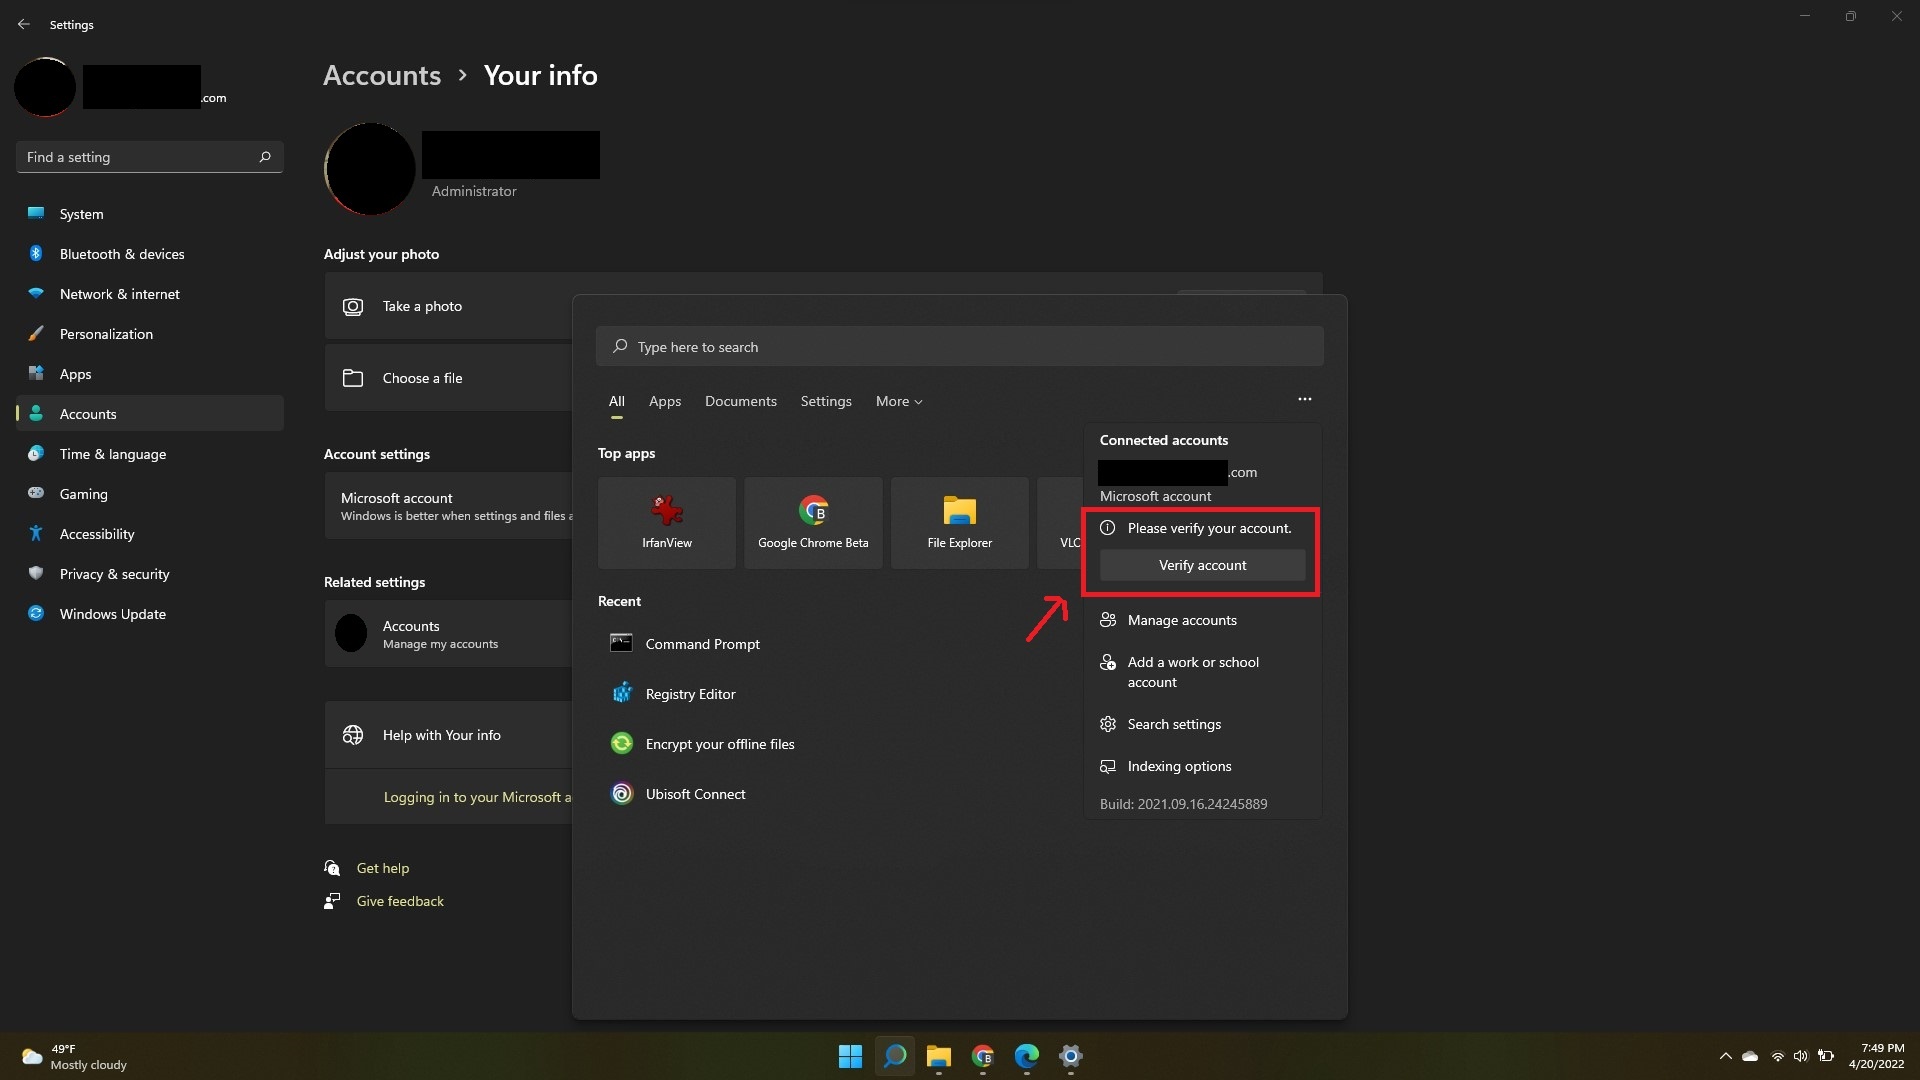 How To Set Up Windows 11 Without a Microsoft Account - Tech Advisor